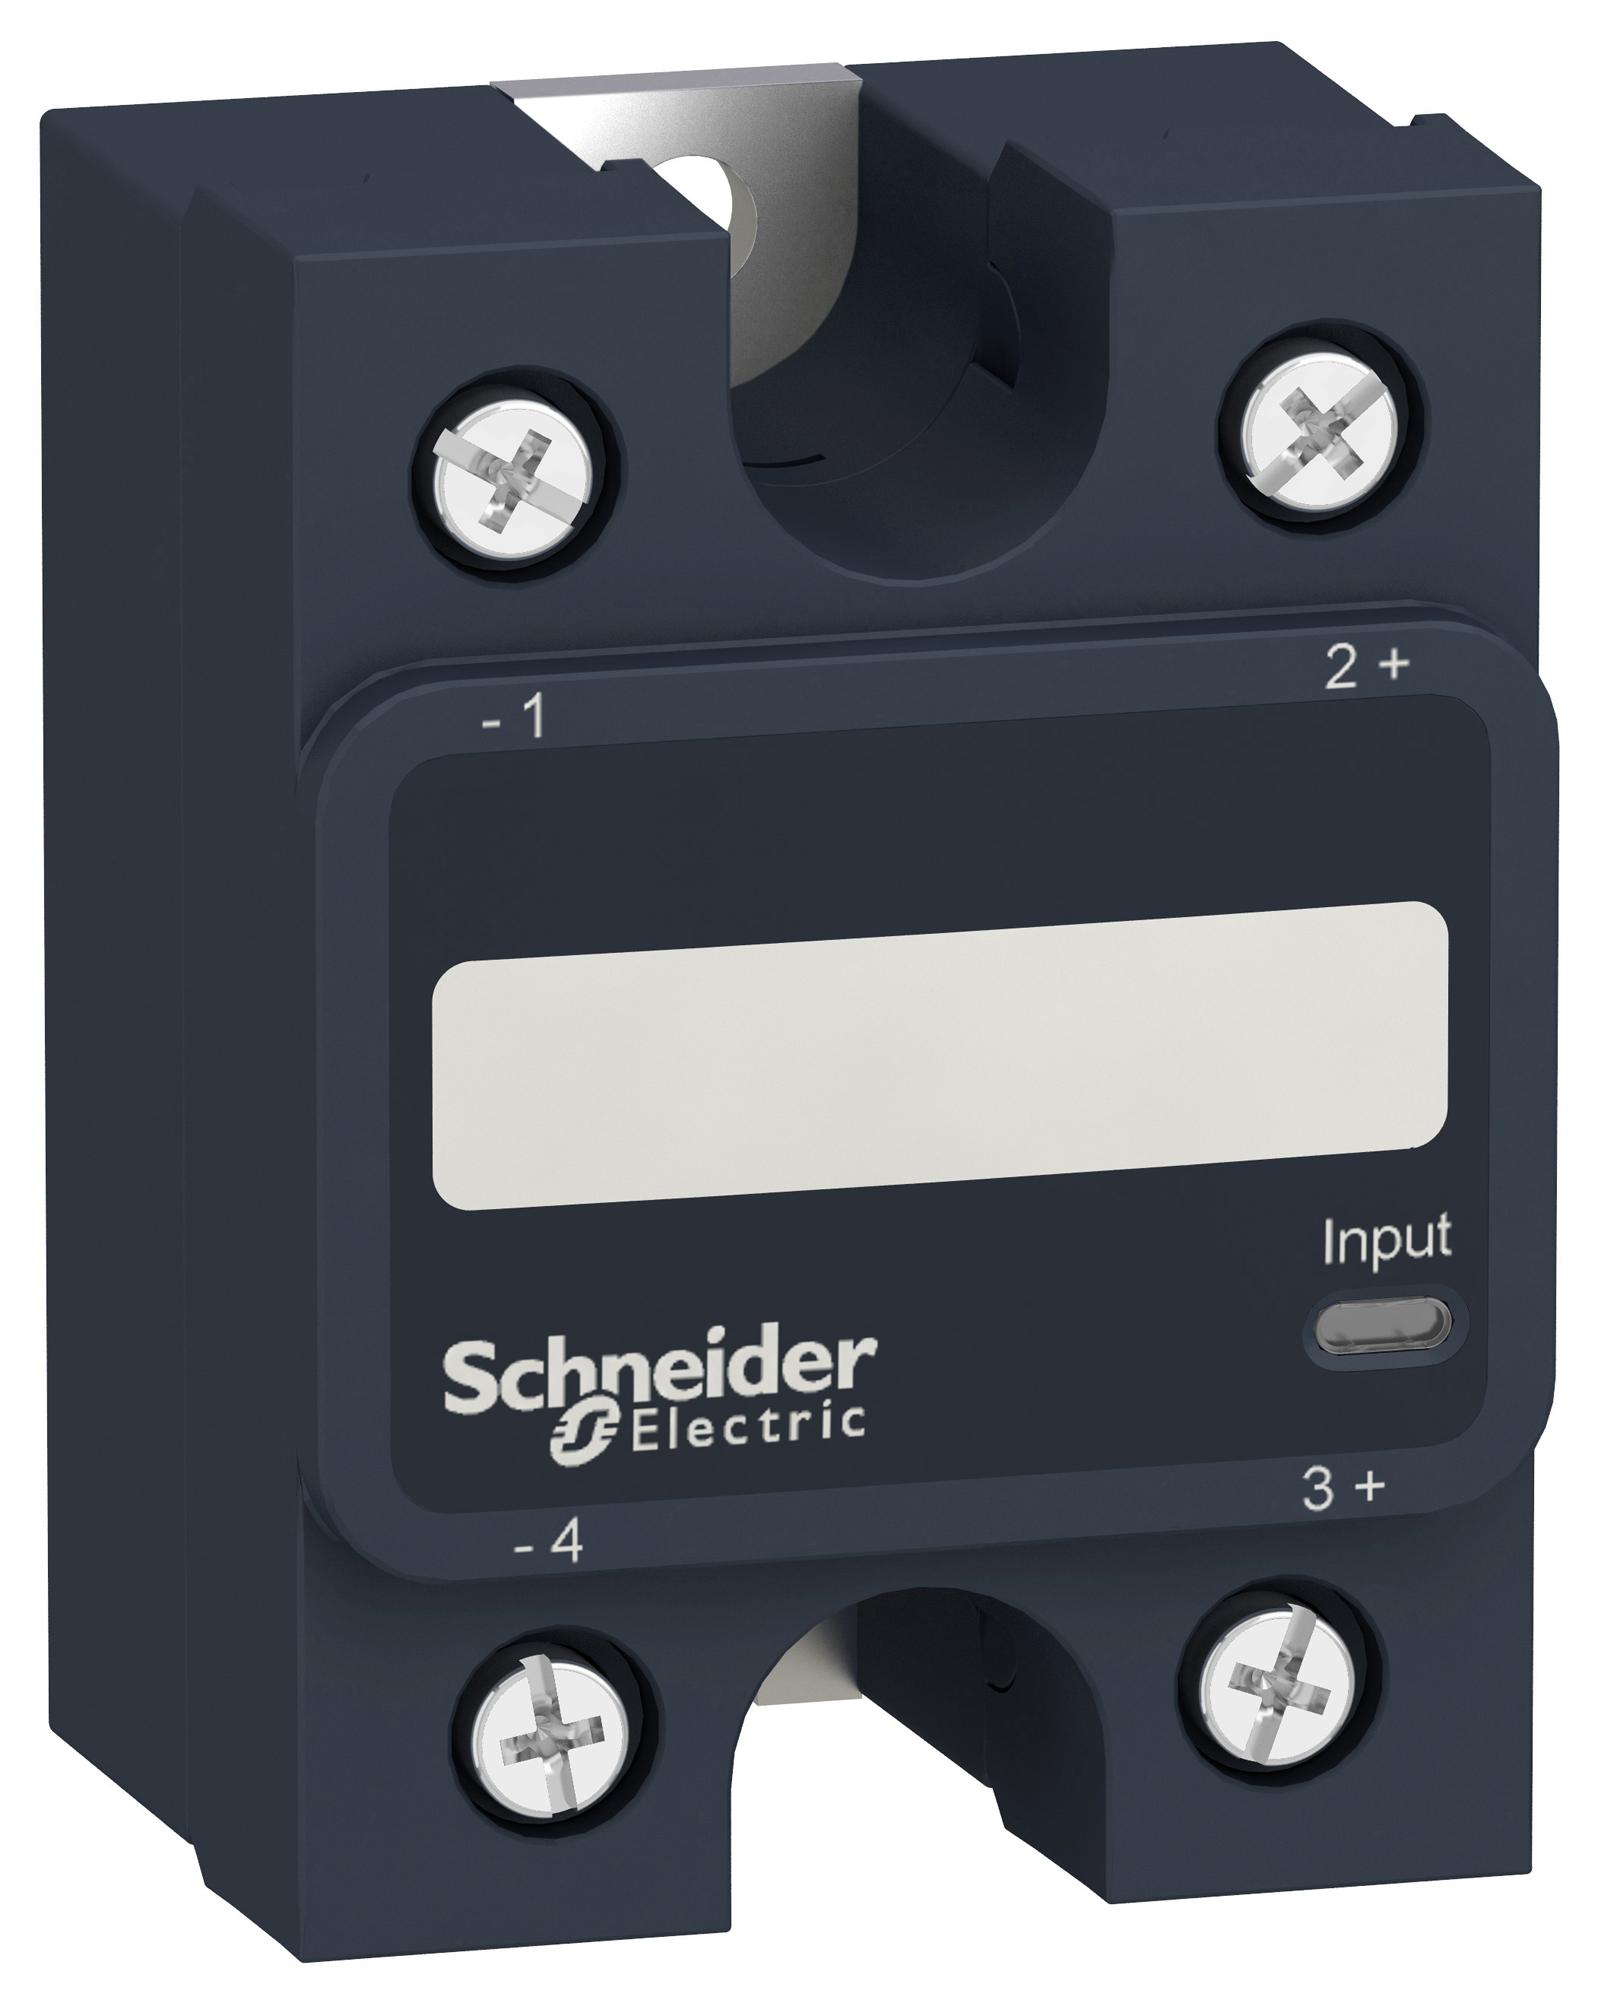 SSP1A475BD SOLID STATE RELAY, SPST, 4-32VDC, 75A SCHNEIDER ELECTRIC